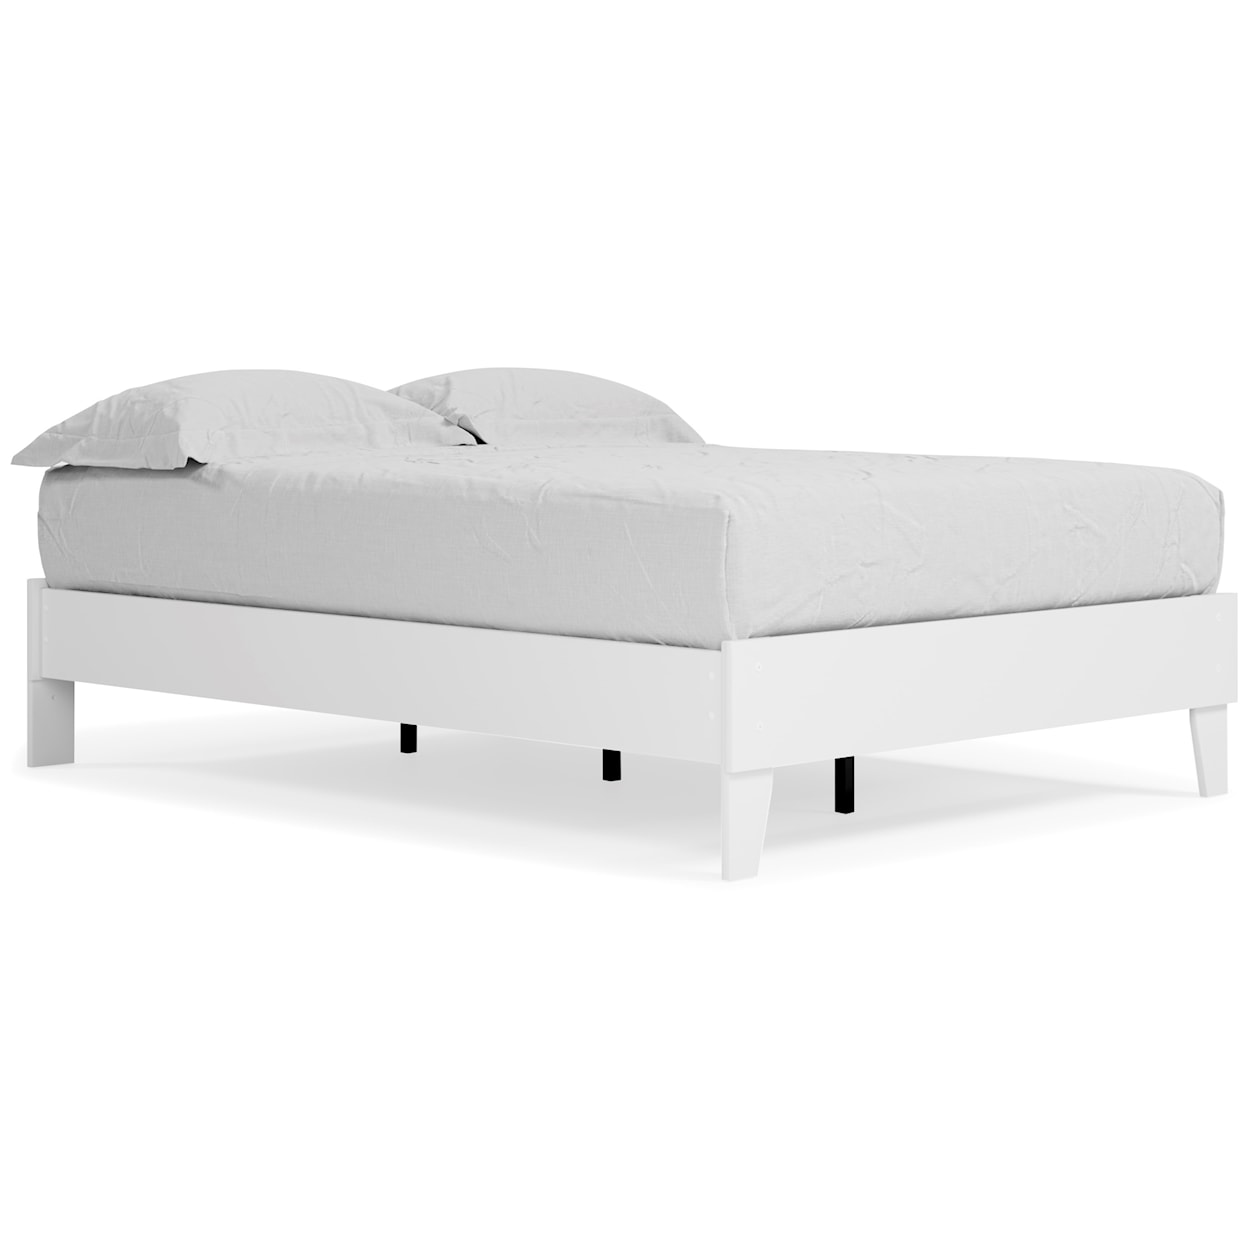 Signature Design by Ashley Piperton Full Platform Bed